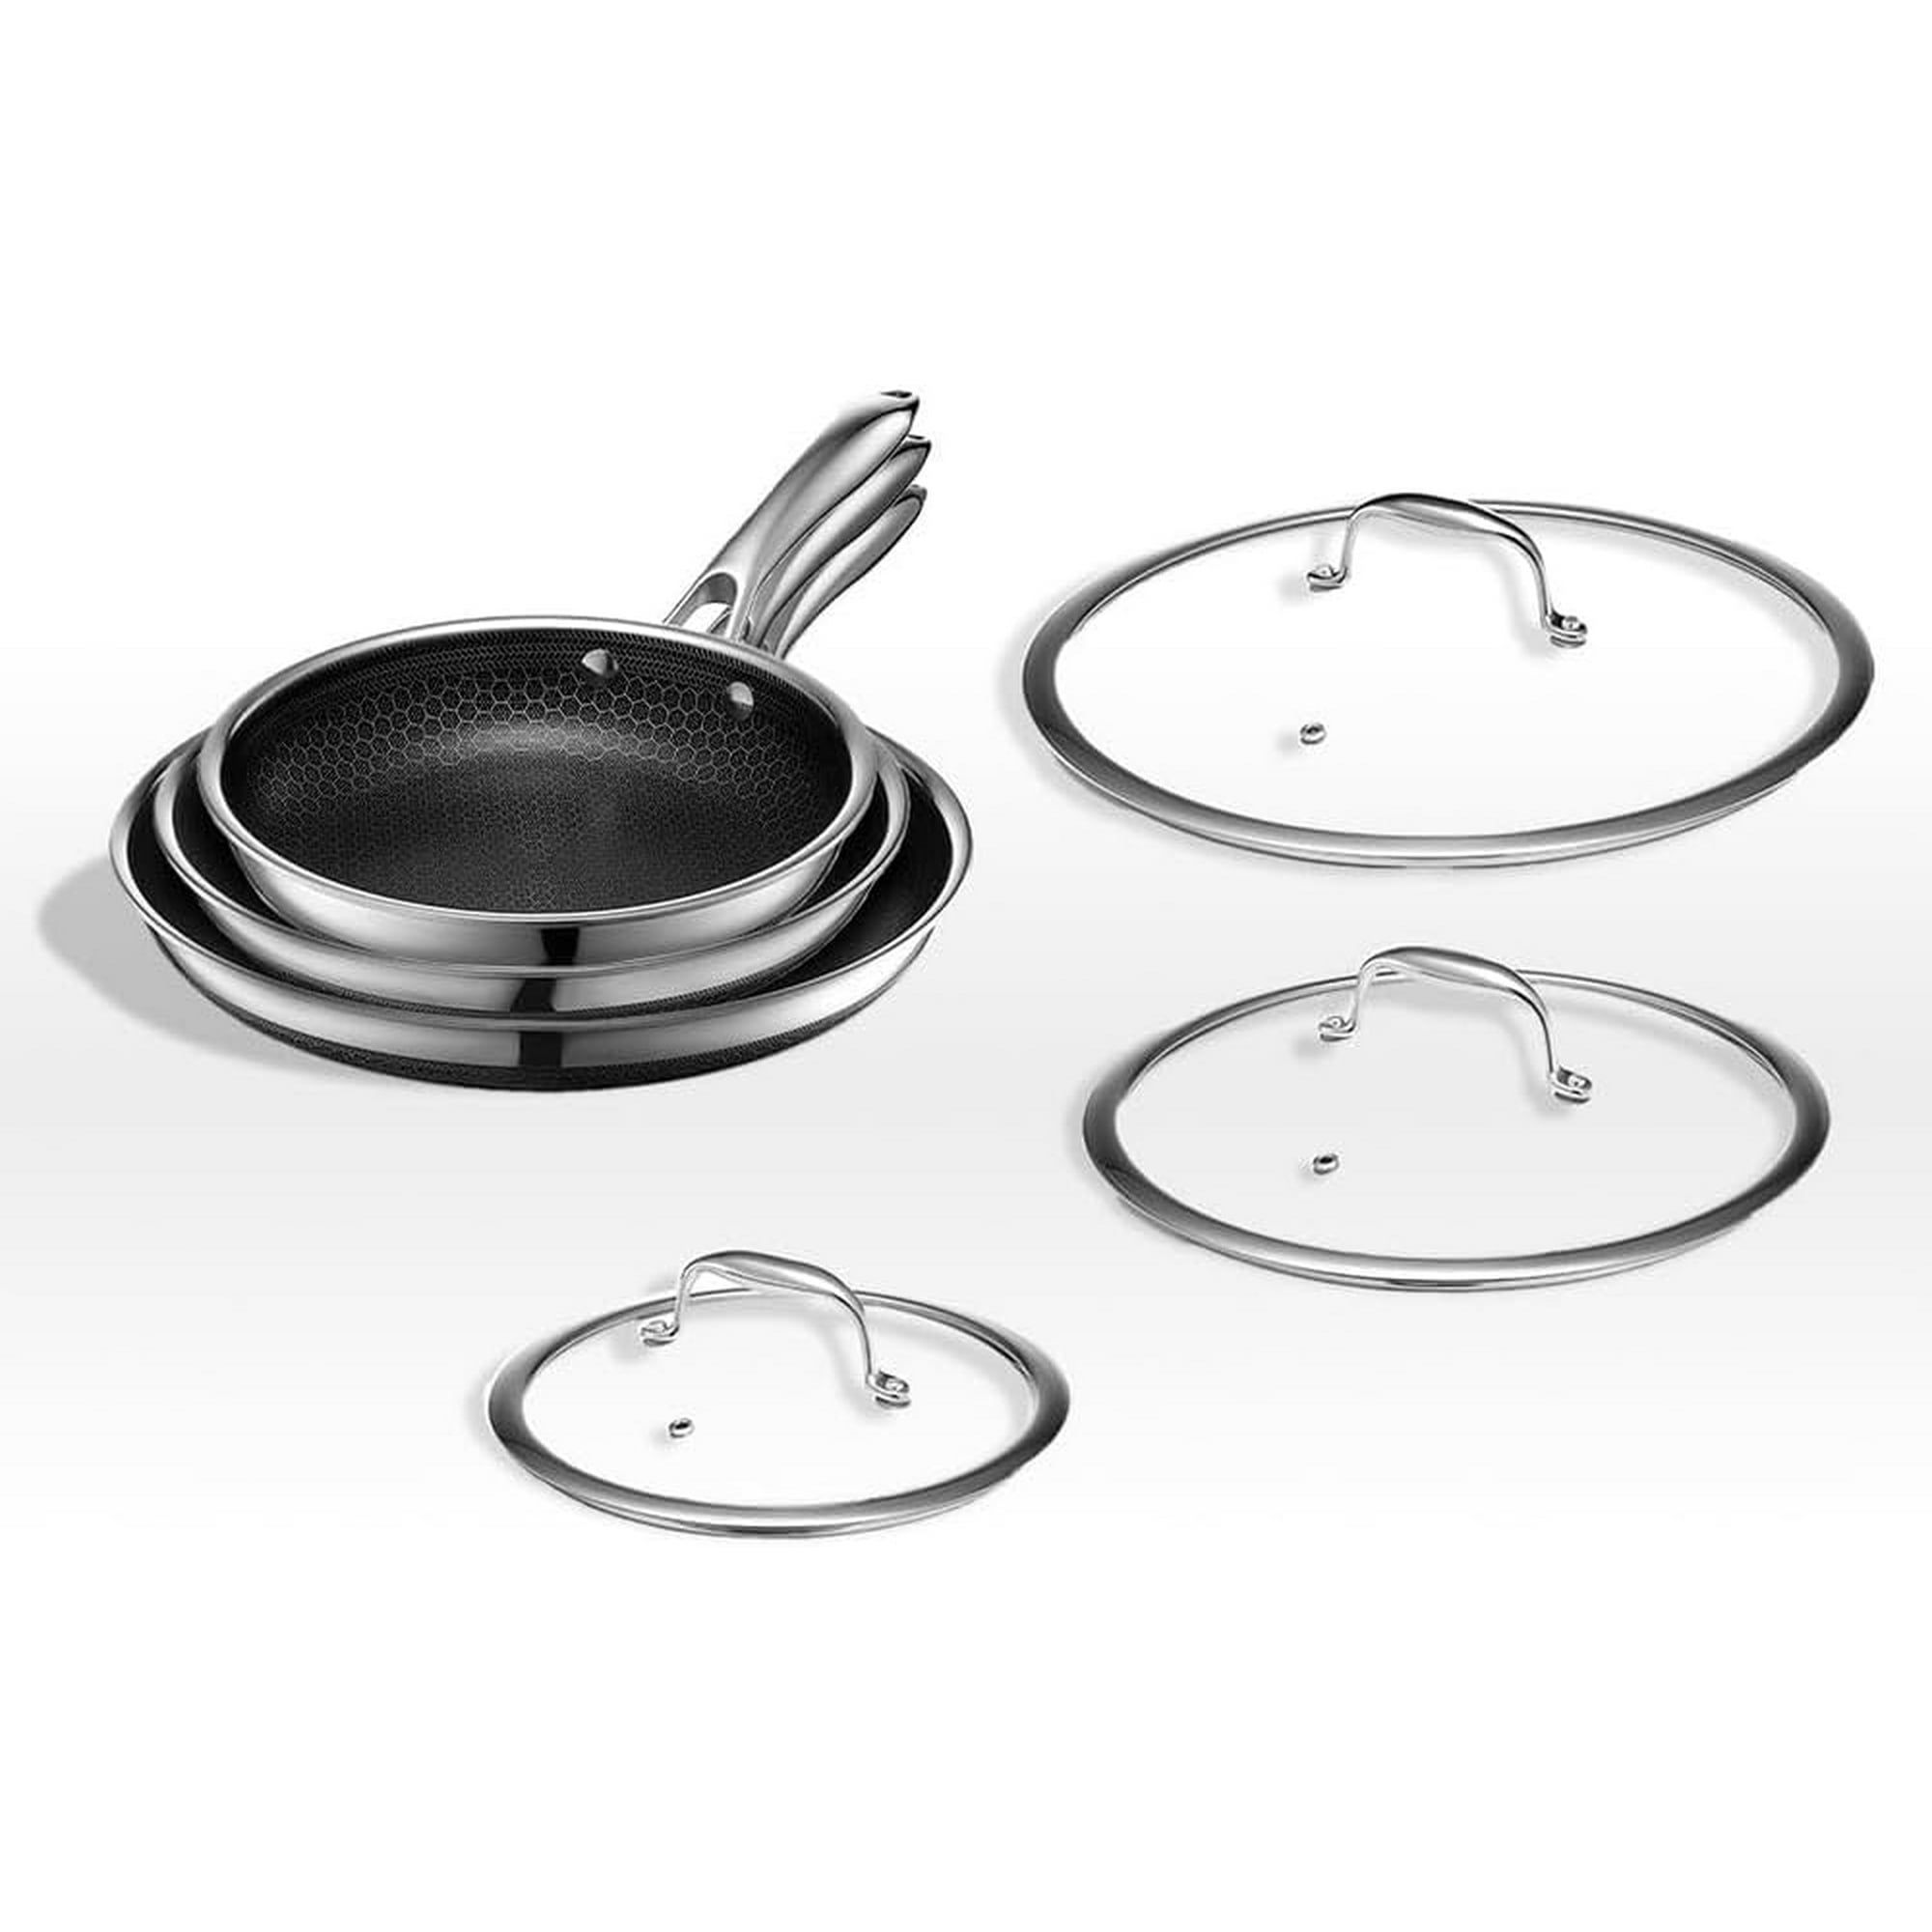 HexClad Cyber Monday cookware sale: Grab Gordon Ramsay-approved